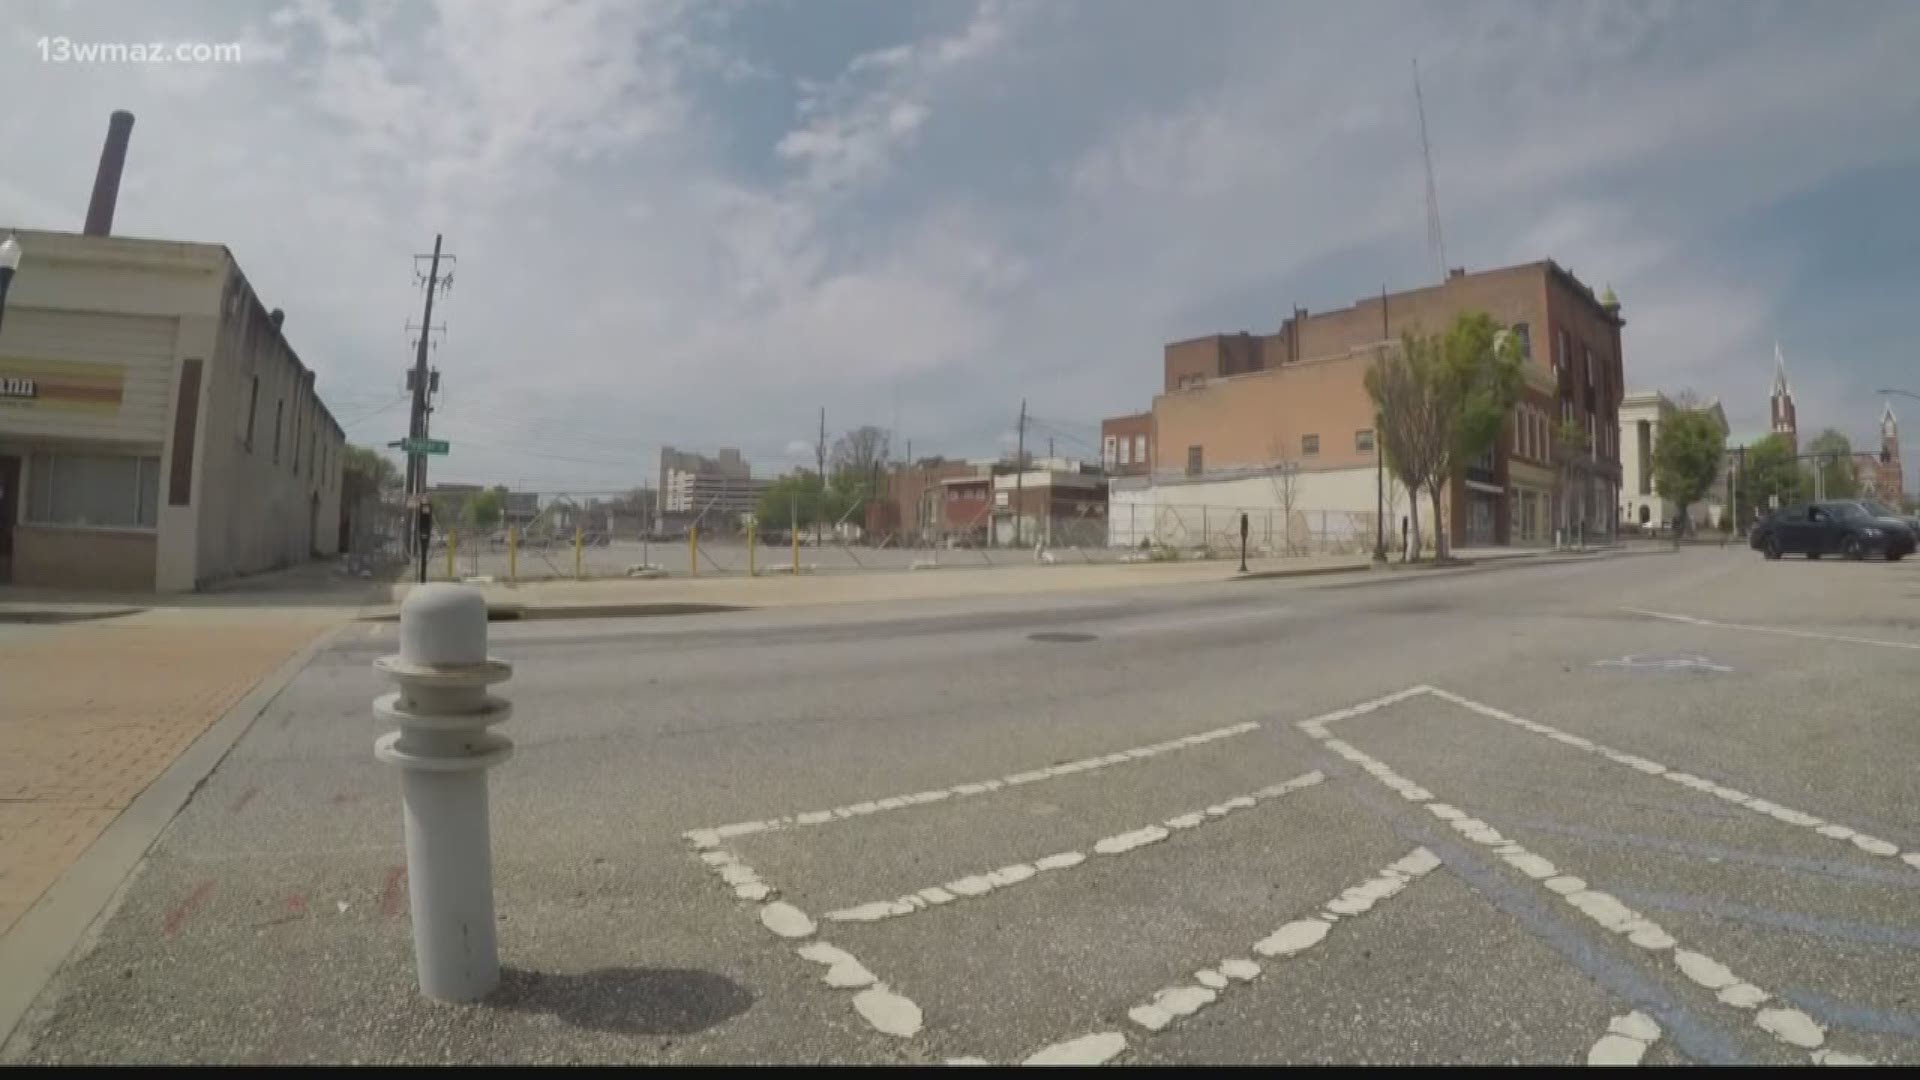 Developers for a big downtown Macon project are asking the county for more than $1 million to build two hotels, apartments, restaurants, and more.